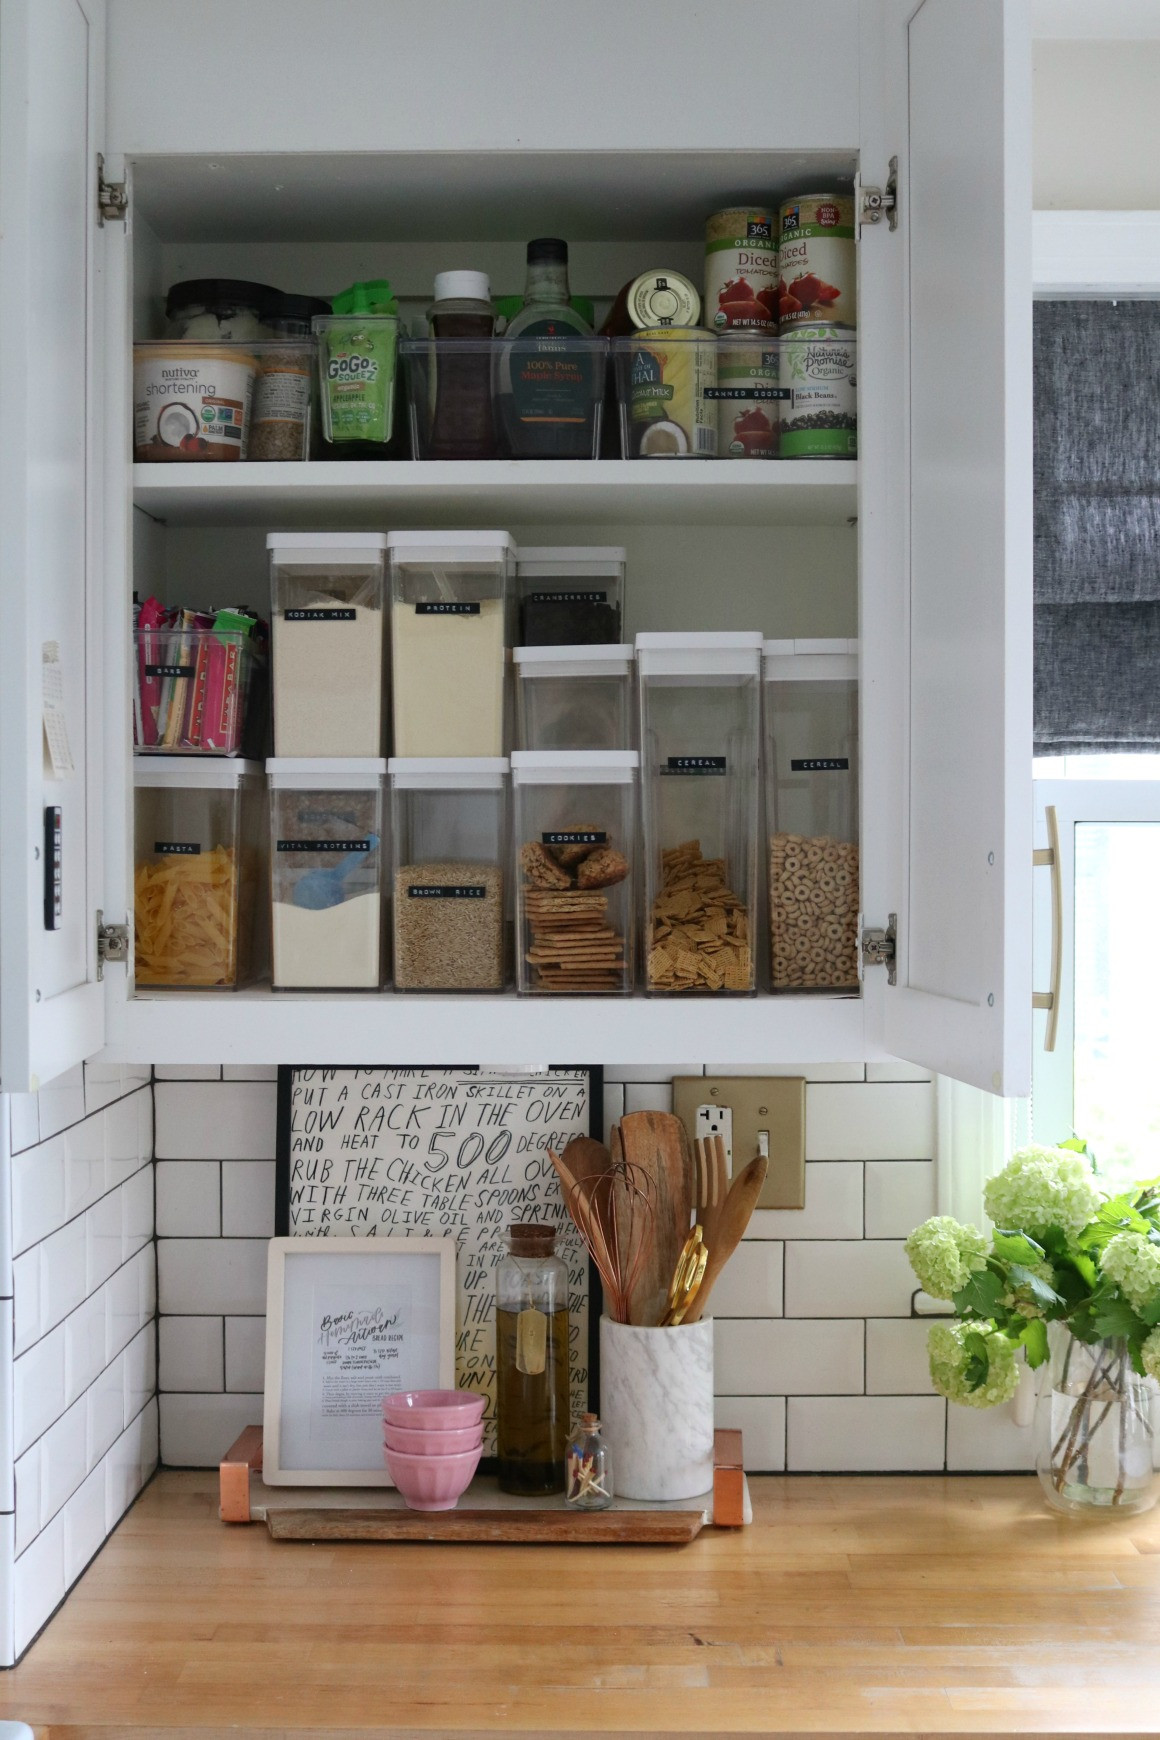 Kitchen Cabinet Organizing
 Small Space Living Series Kitchen Cabinets and Organizing